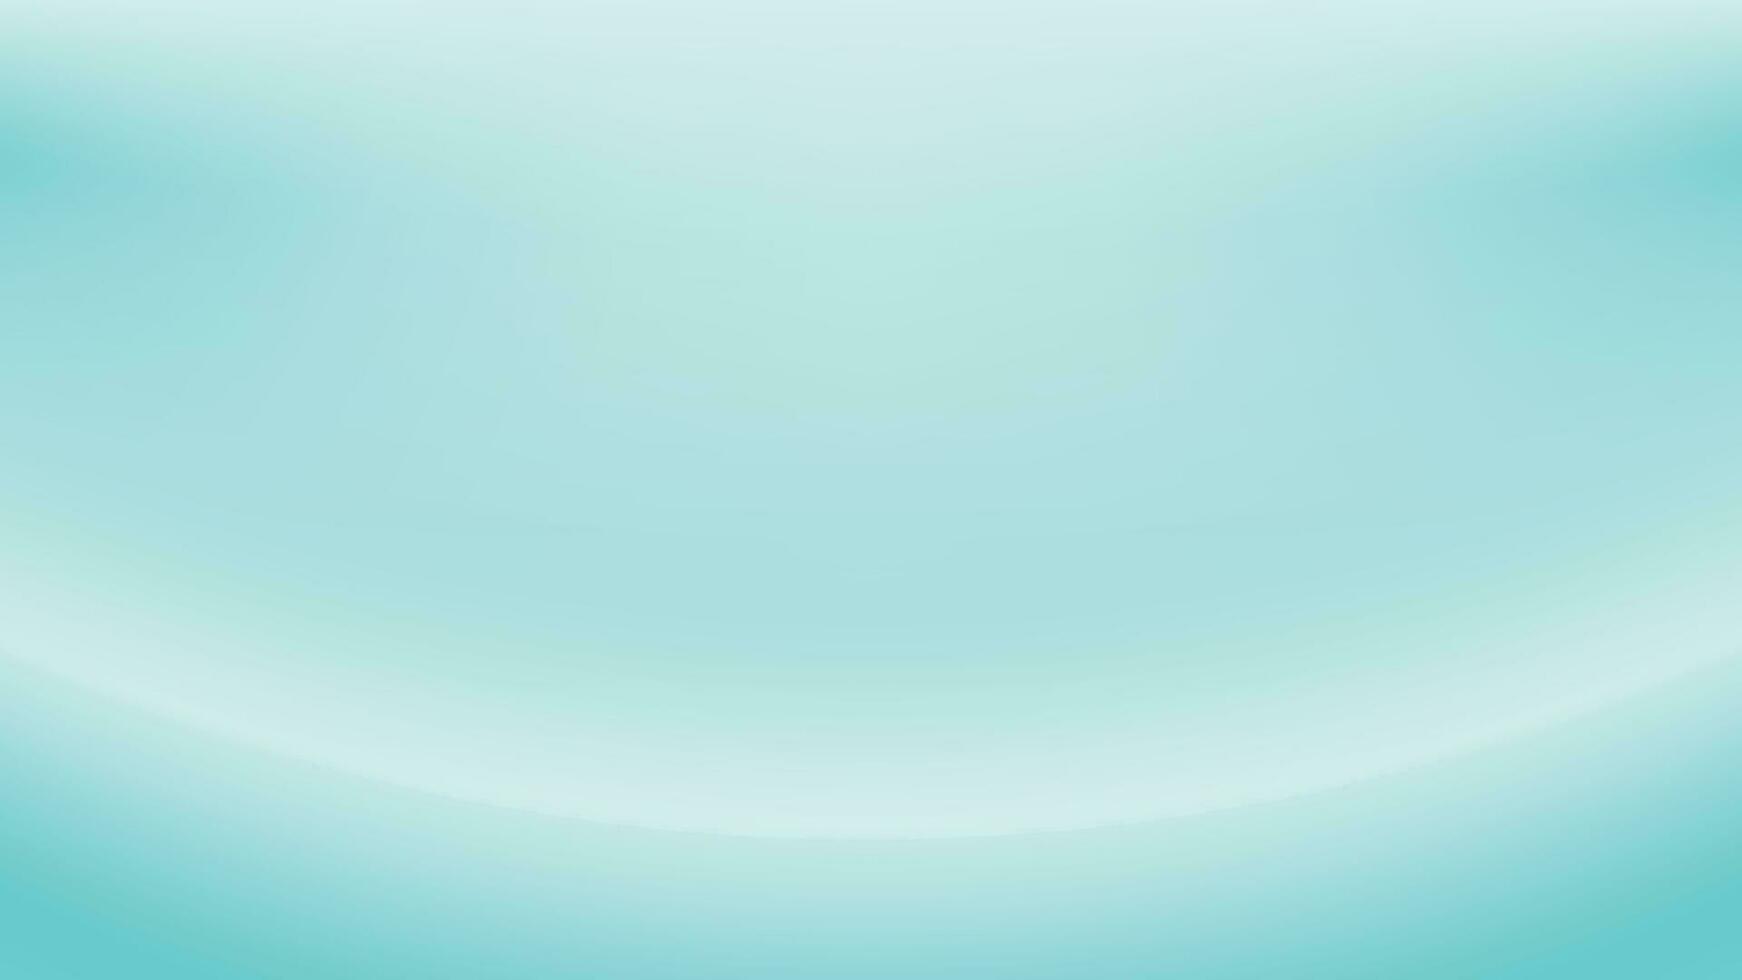 Blue Green colored studio gradient with light curve background. Vector illustration